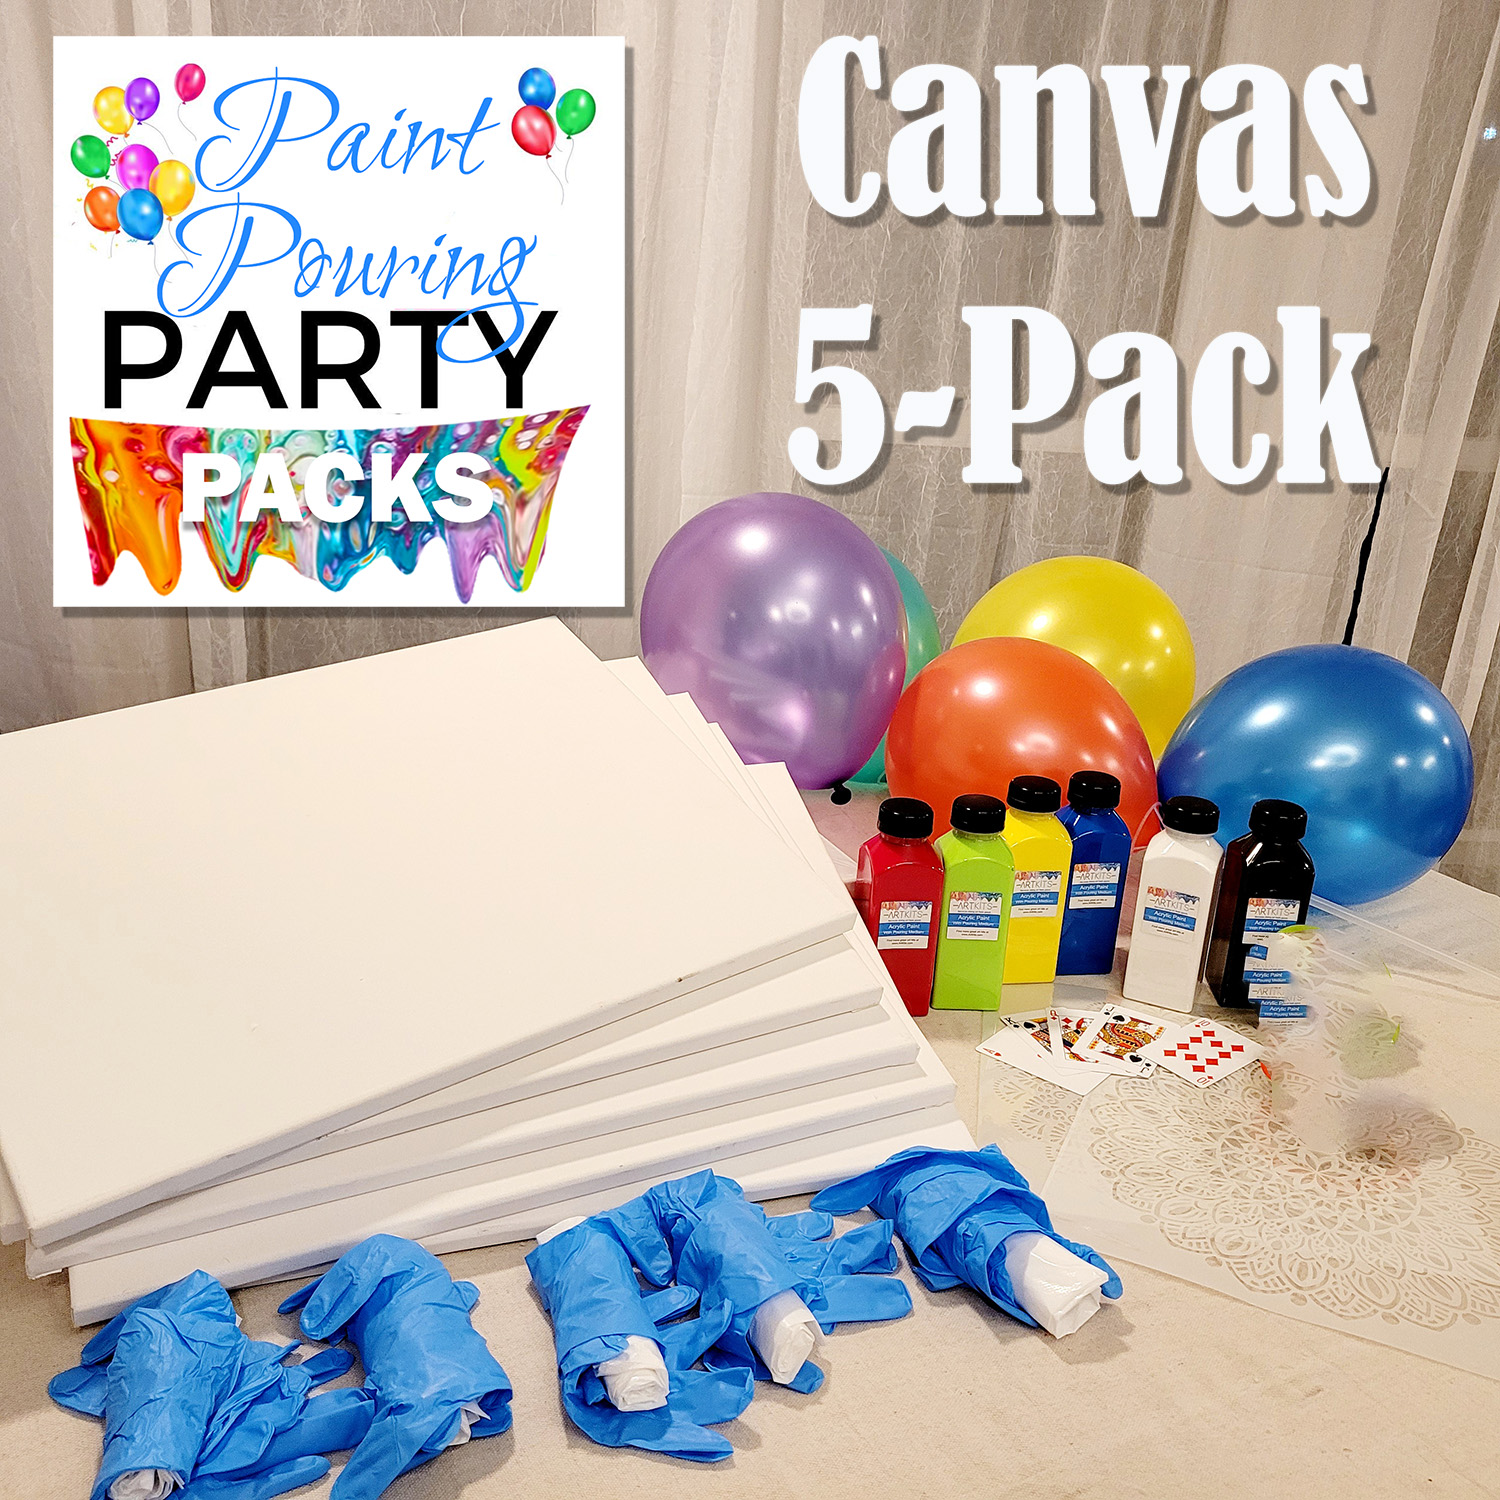 PaintPouringPartyPack_Canvas-5Pack-7-23